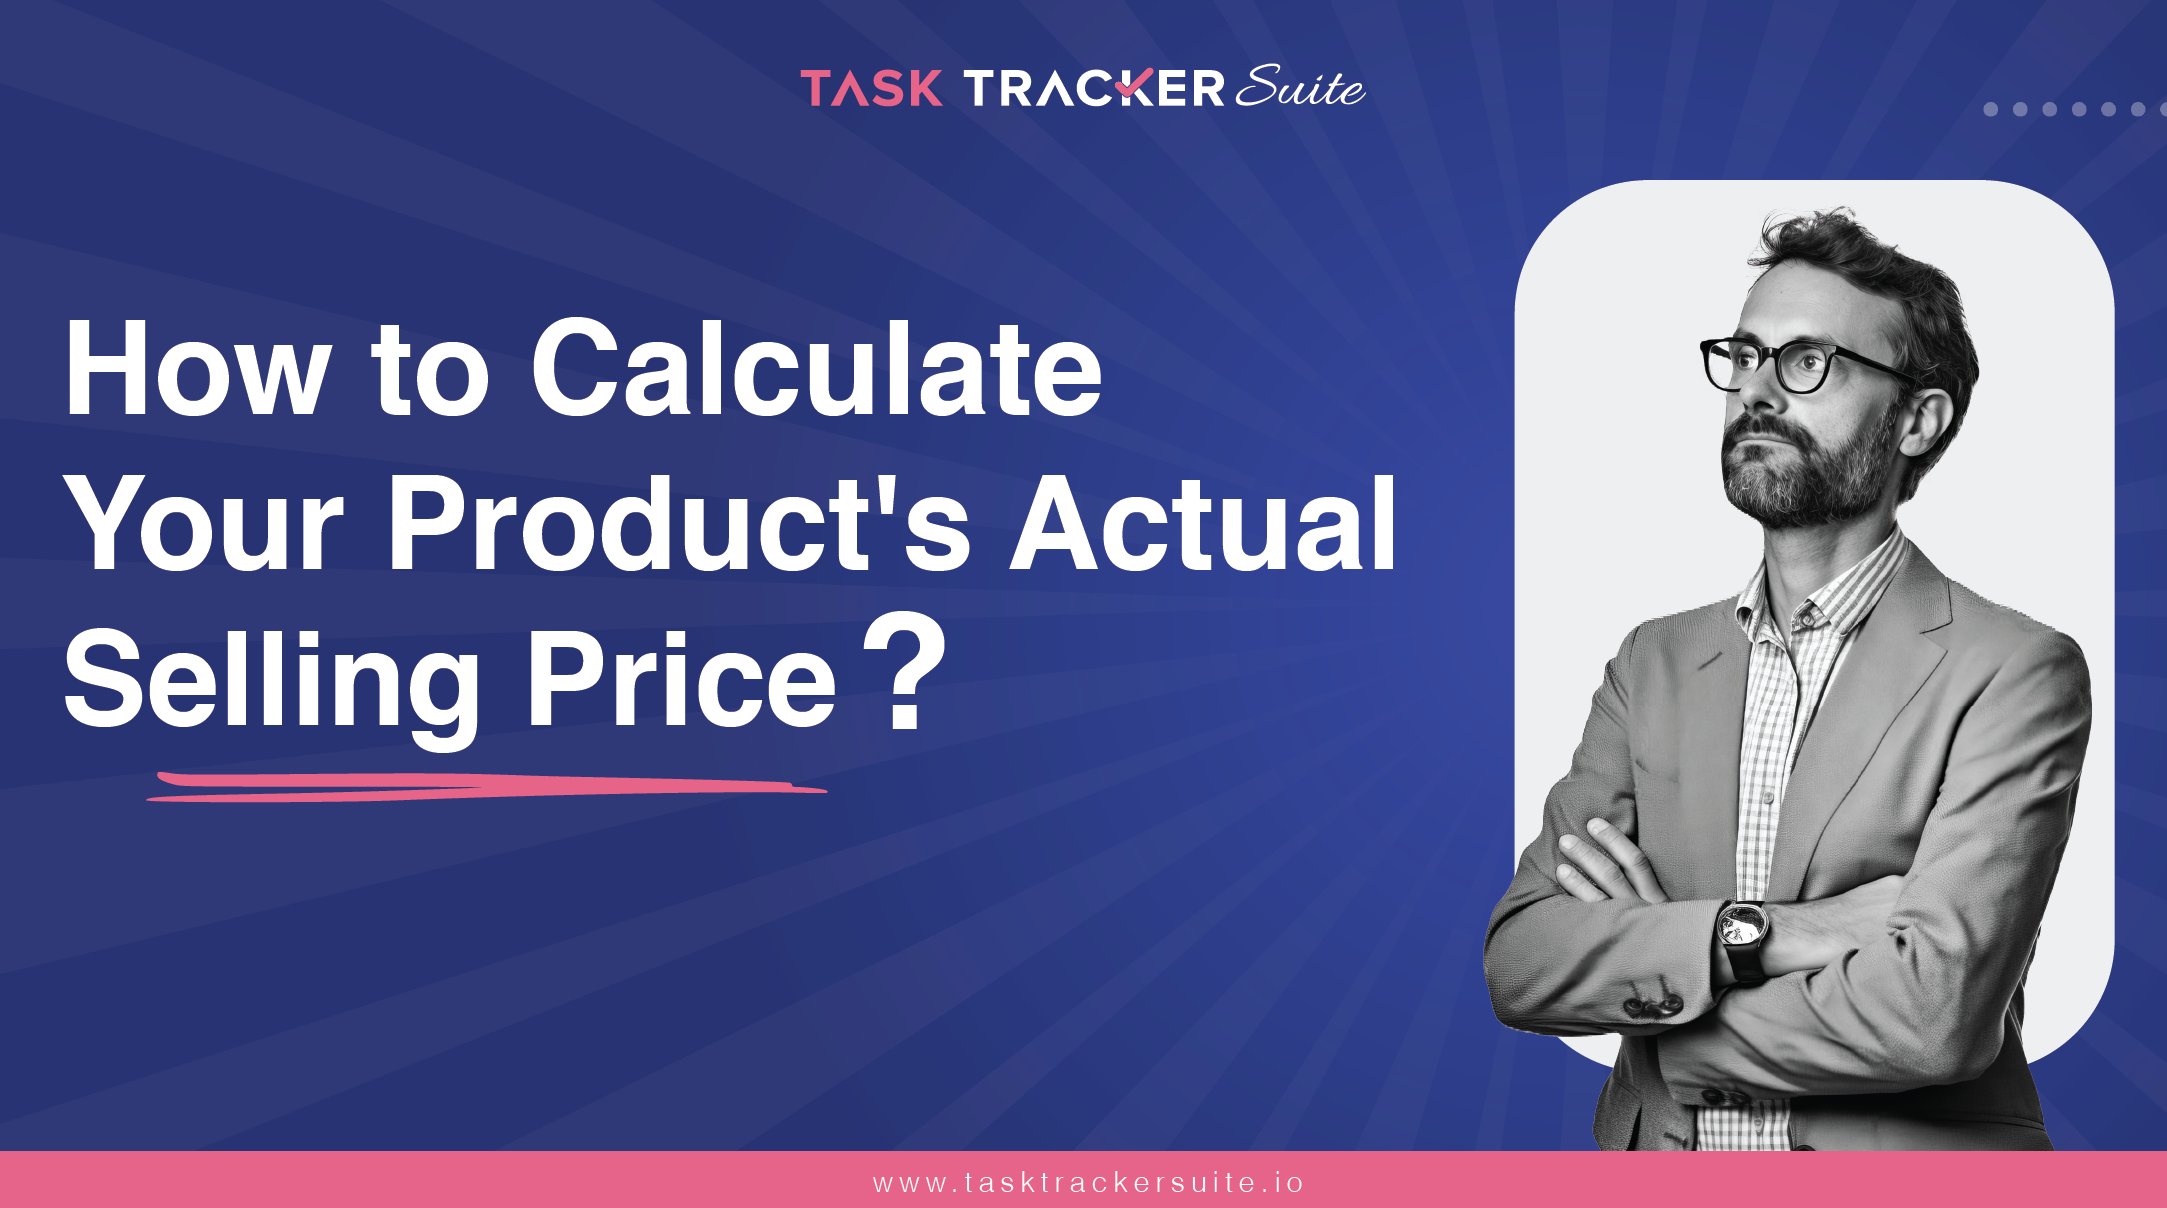 How to Calculate Your Product's Actual Selling Price